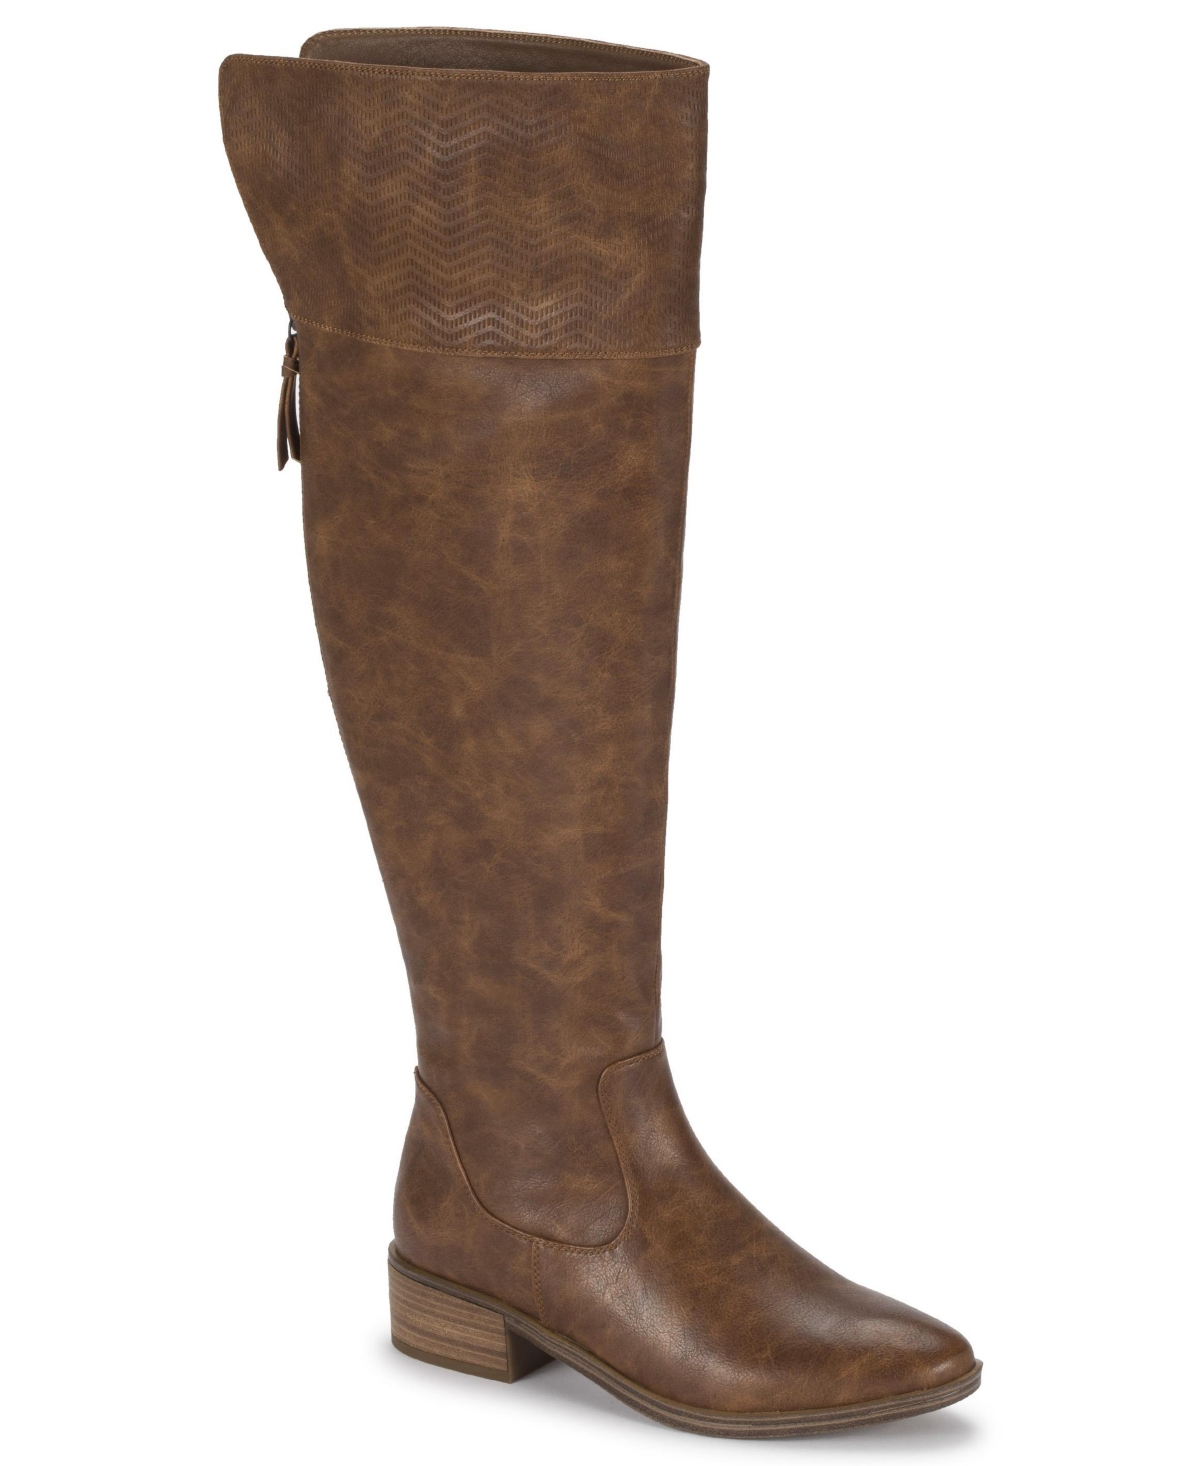 Marcella Wide Calf Over the Knee Boots - Acorn